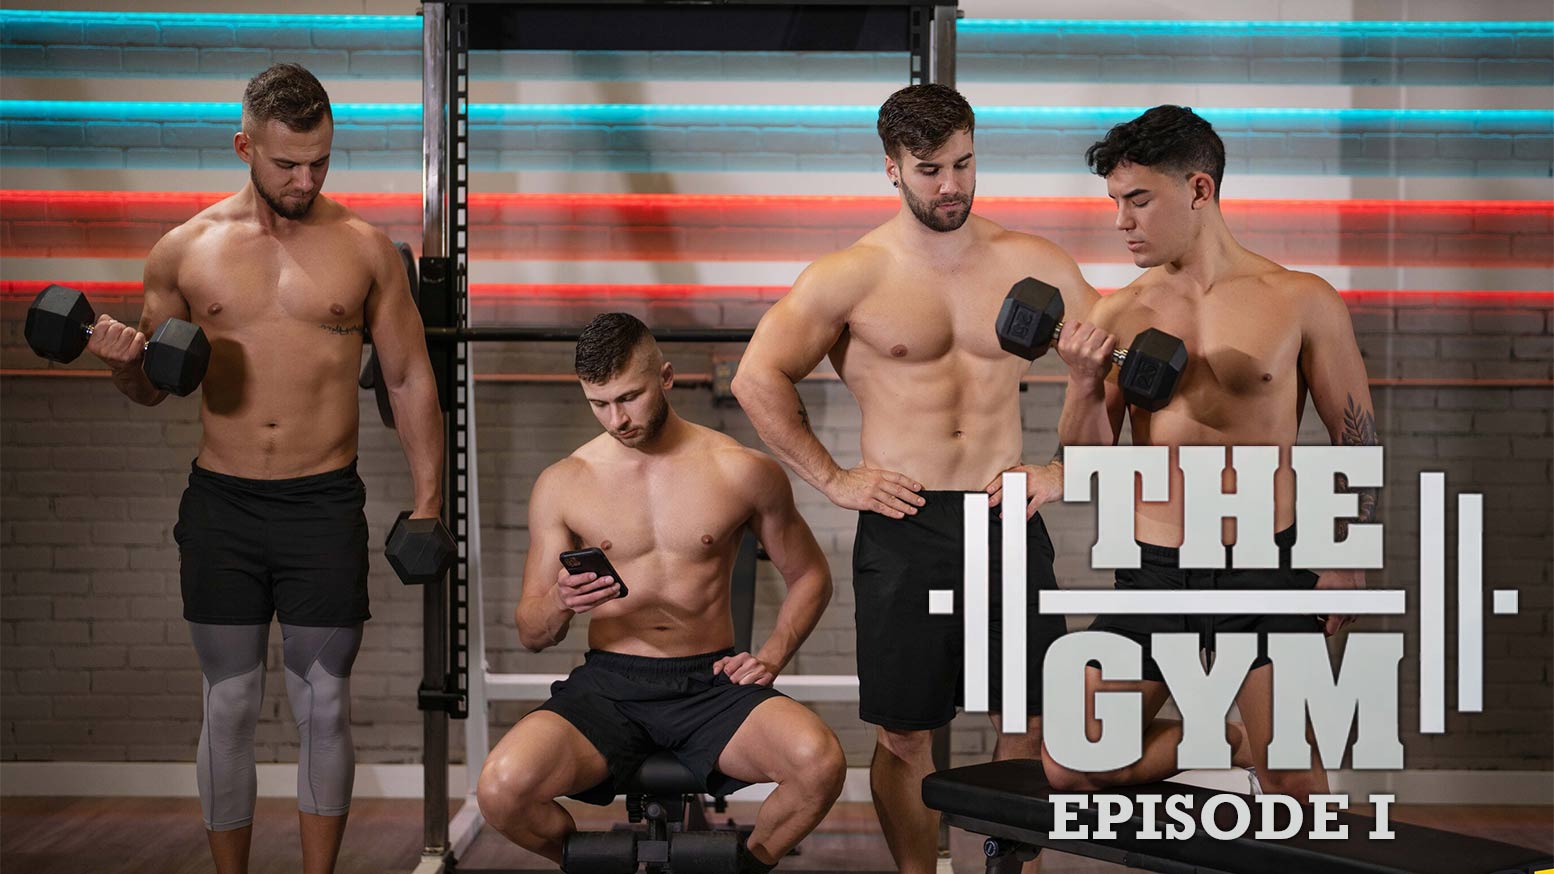 Sean Cody Stu Returns In A Cameo Role with Devy, JC and Josh in The Gym Episode 1 photo